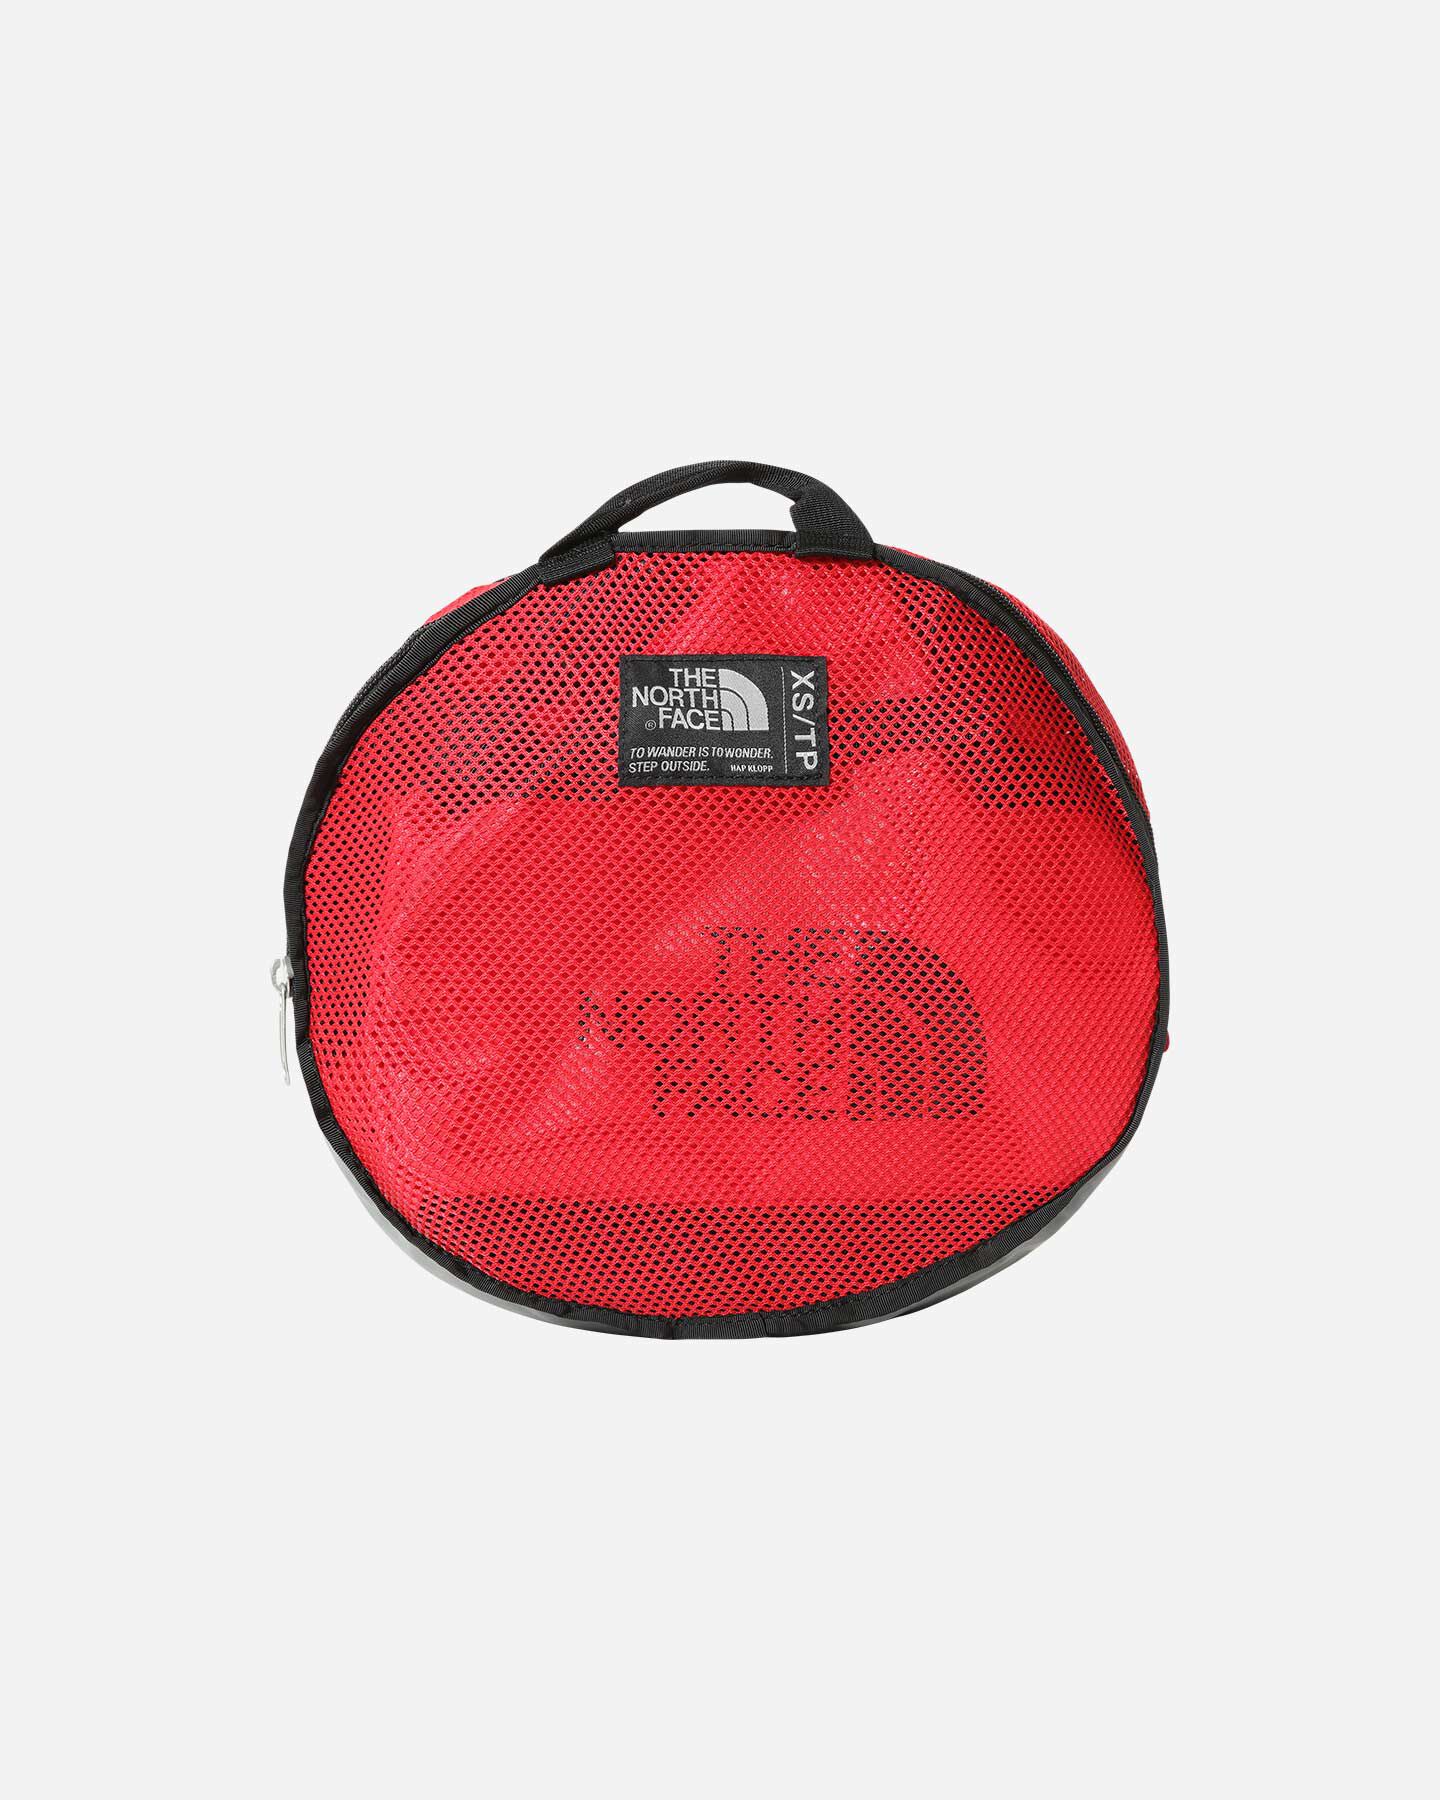  Borsa THE NORTH FACE BASE CAMP DUFFEL XS  S5347785|KZ3|OS scatto 3